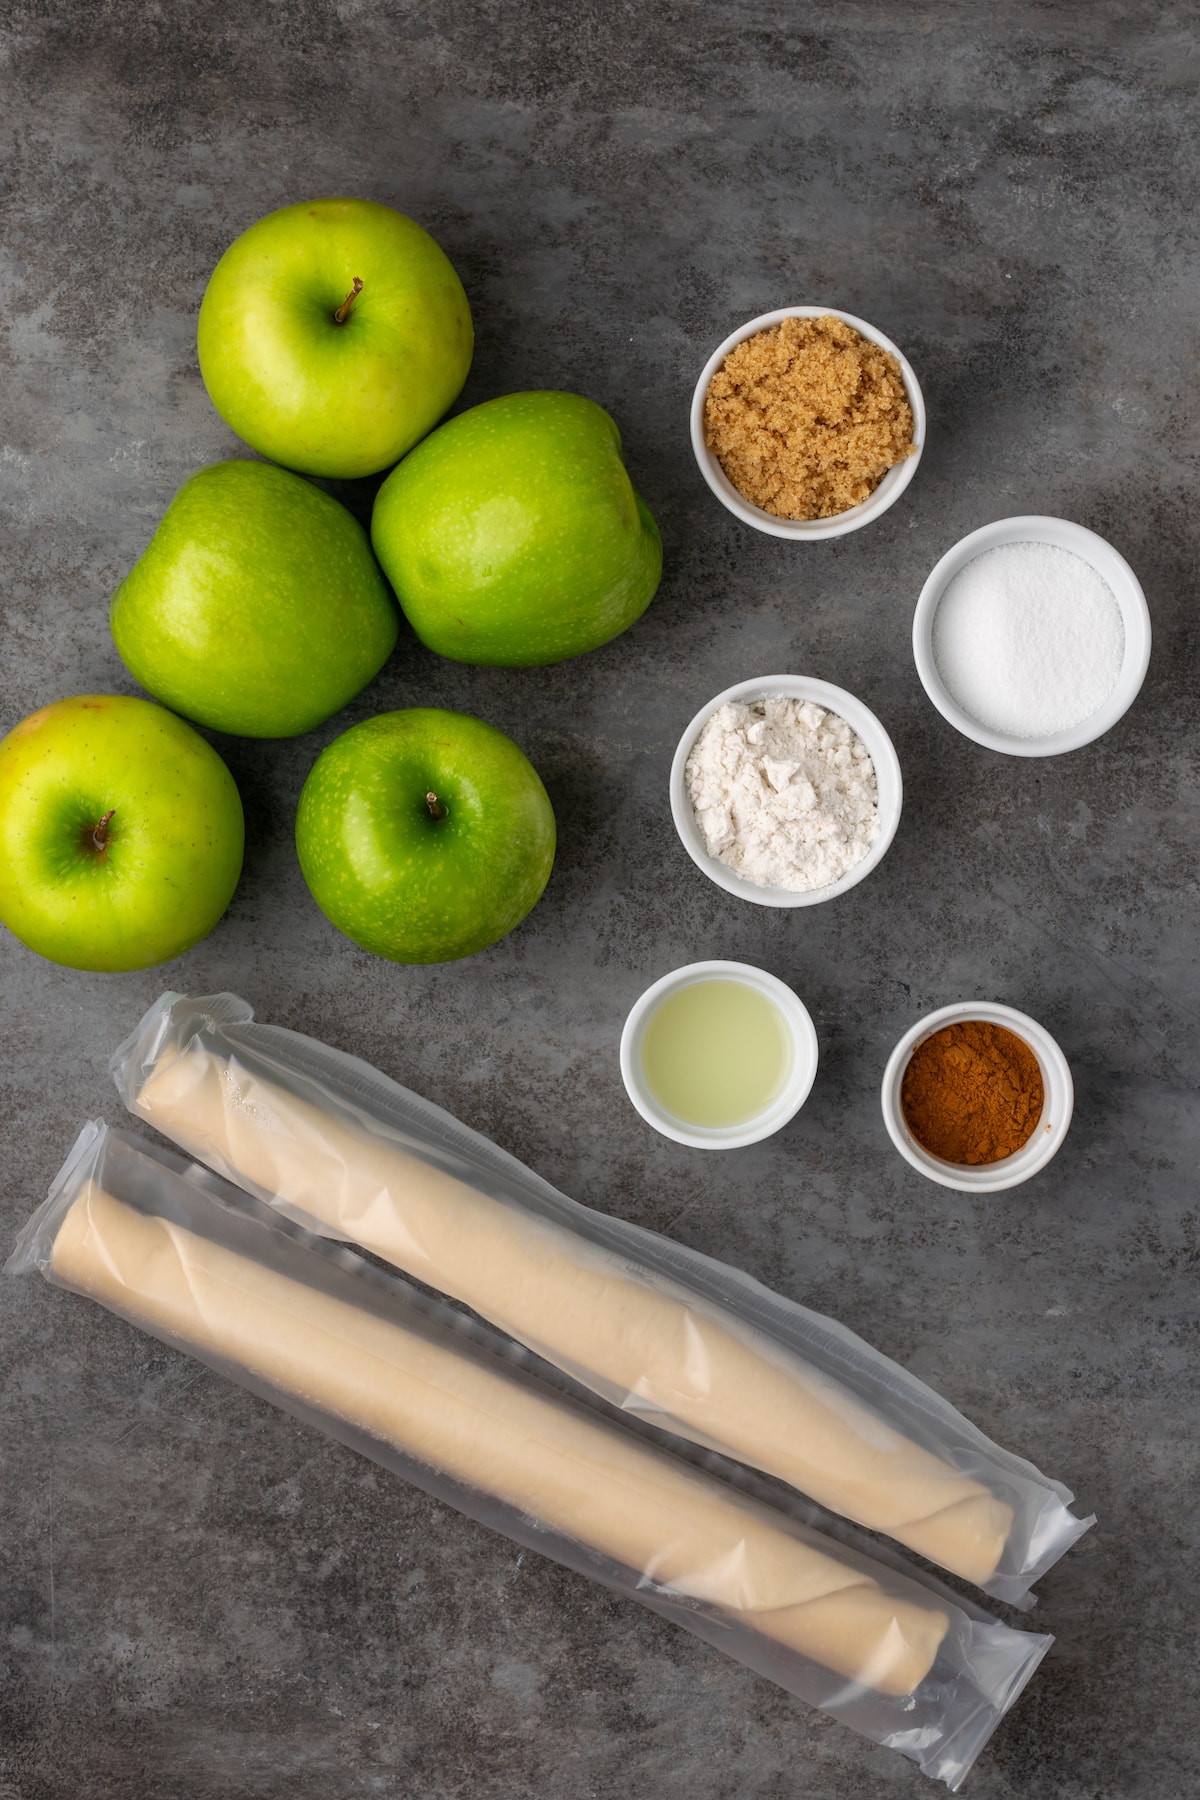 The ingredients for mini apple pies.